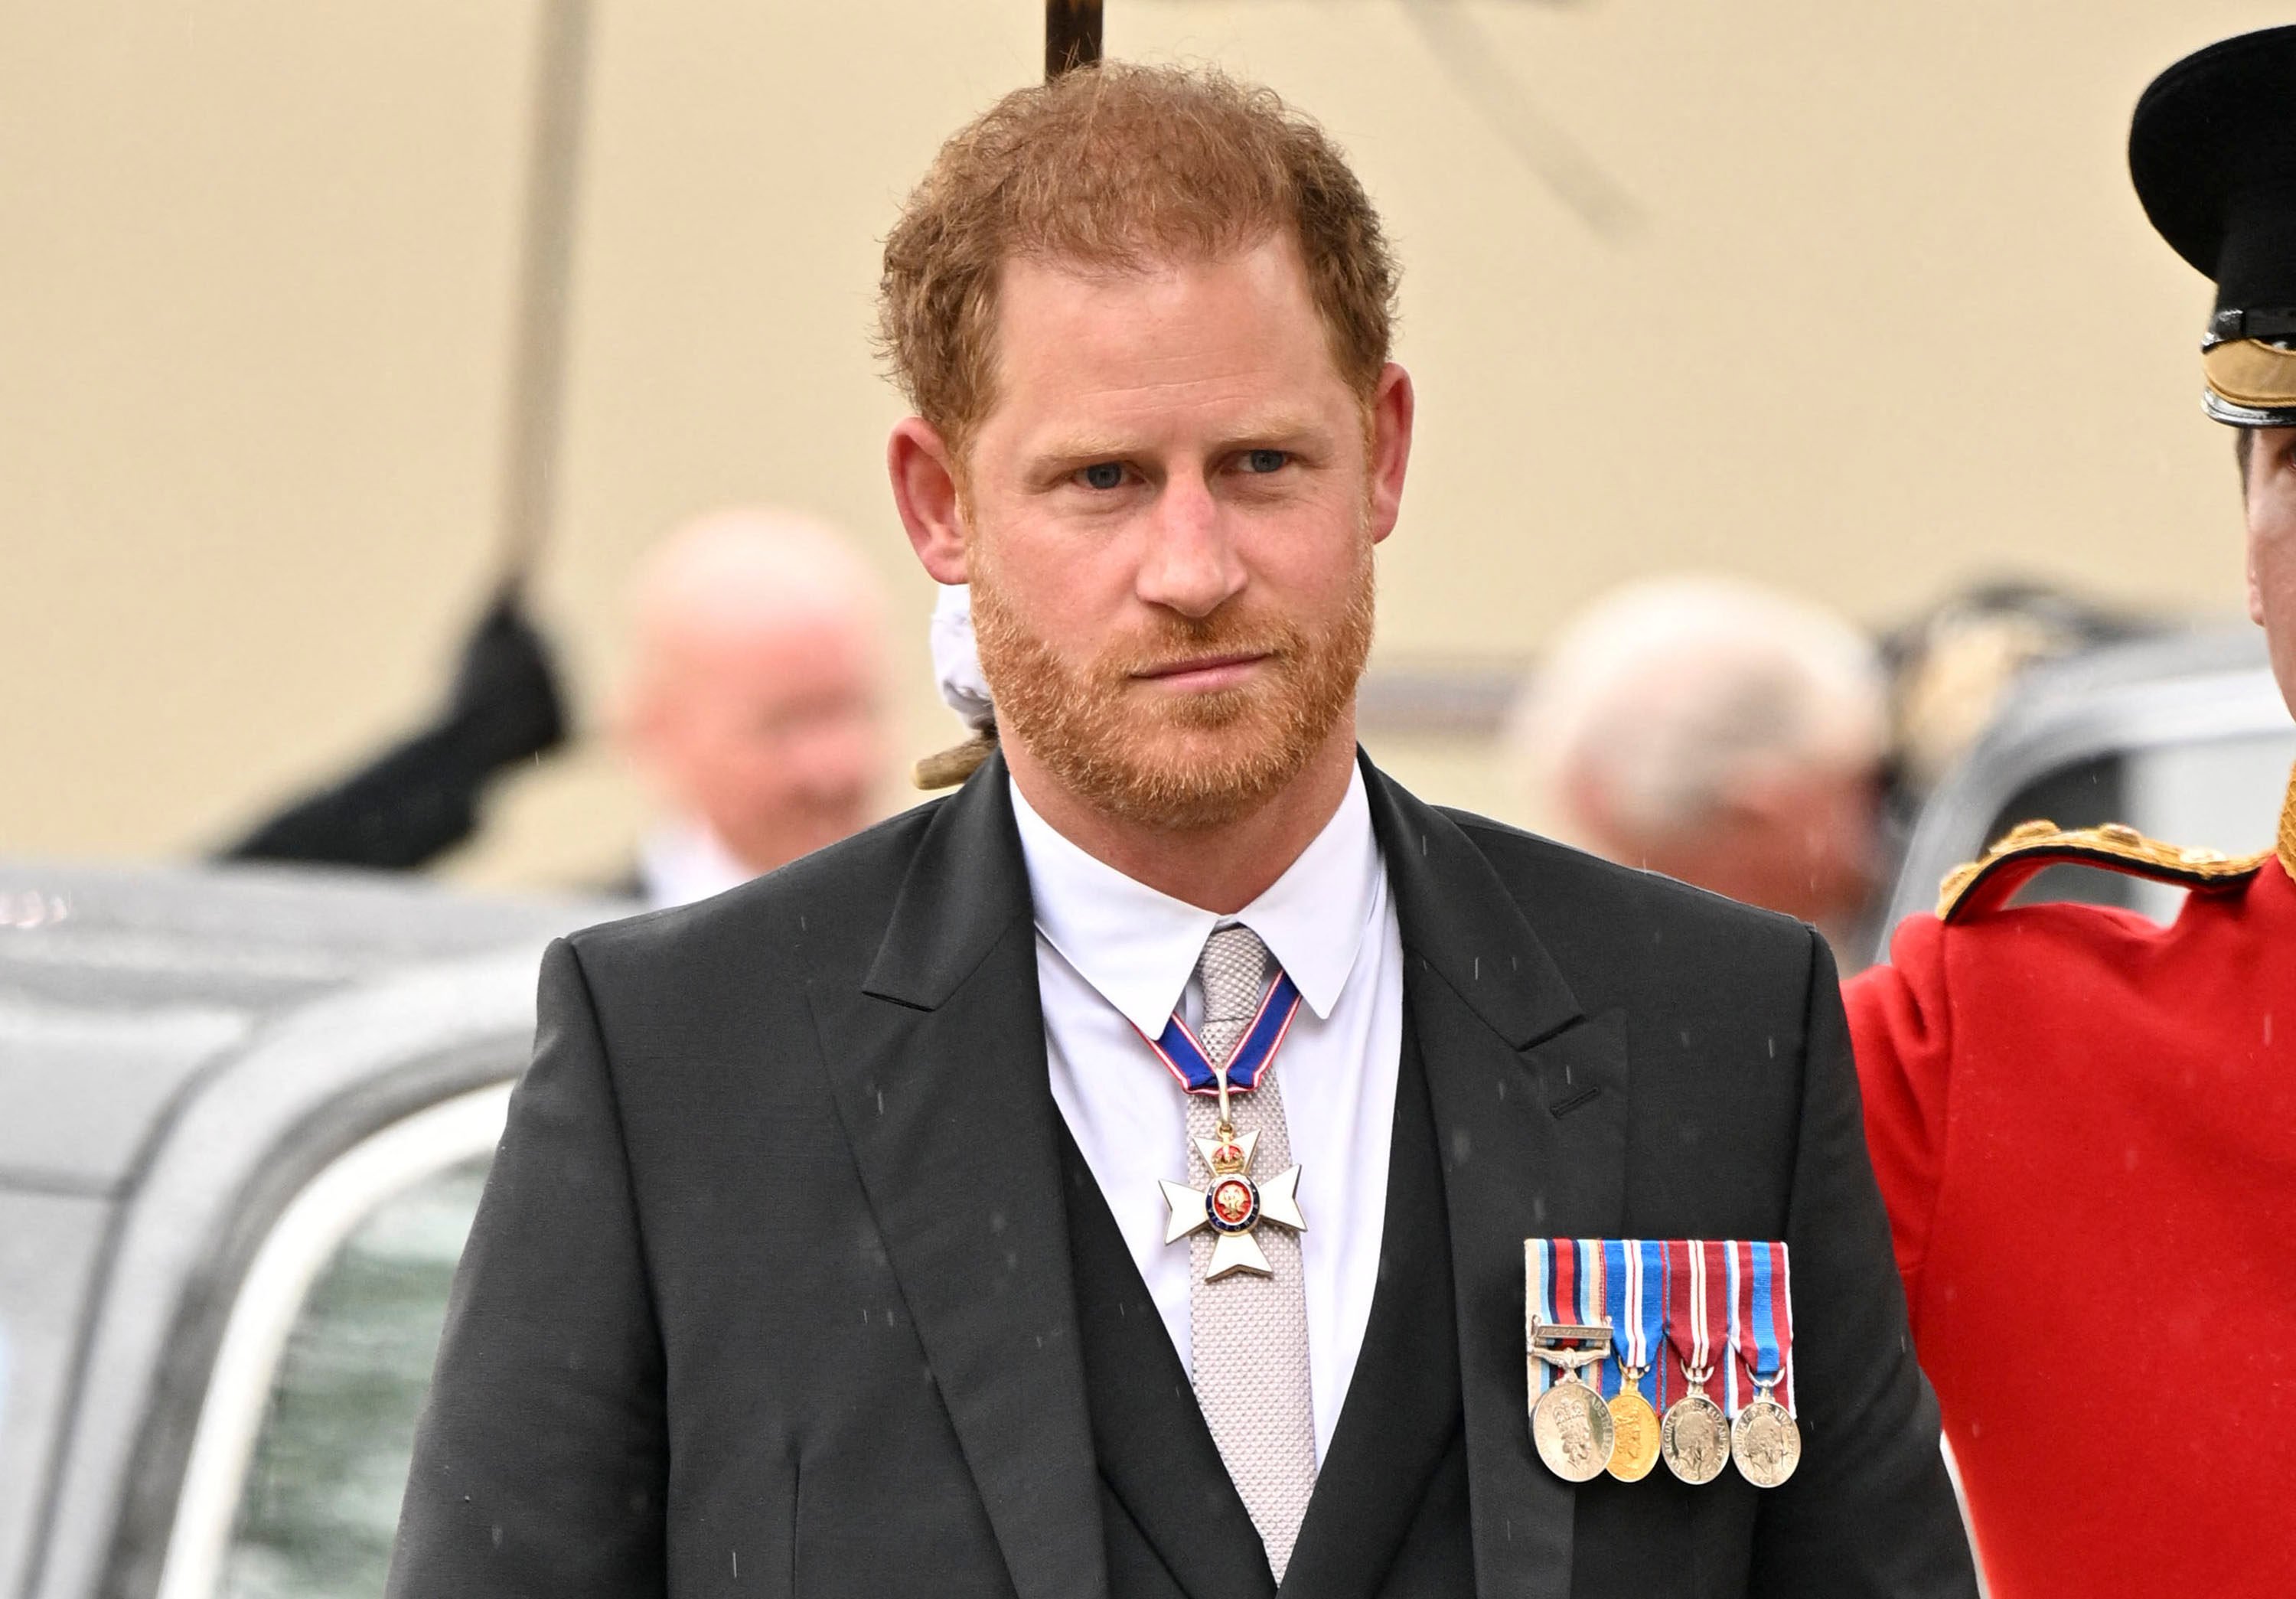 Britain’s Prince Harry, Duke of Sussex arrives at Westminster Abbey ahead of the coronations of Britain’s King Charles III and Britain’s Camilla, Queen Consort. Photo: Pool/AFP